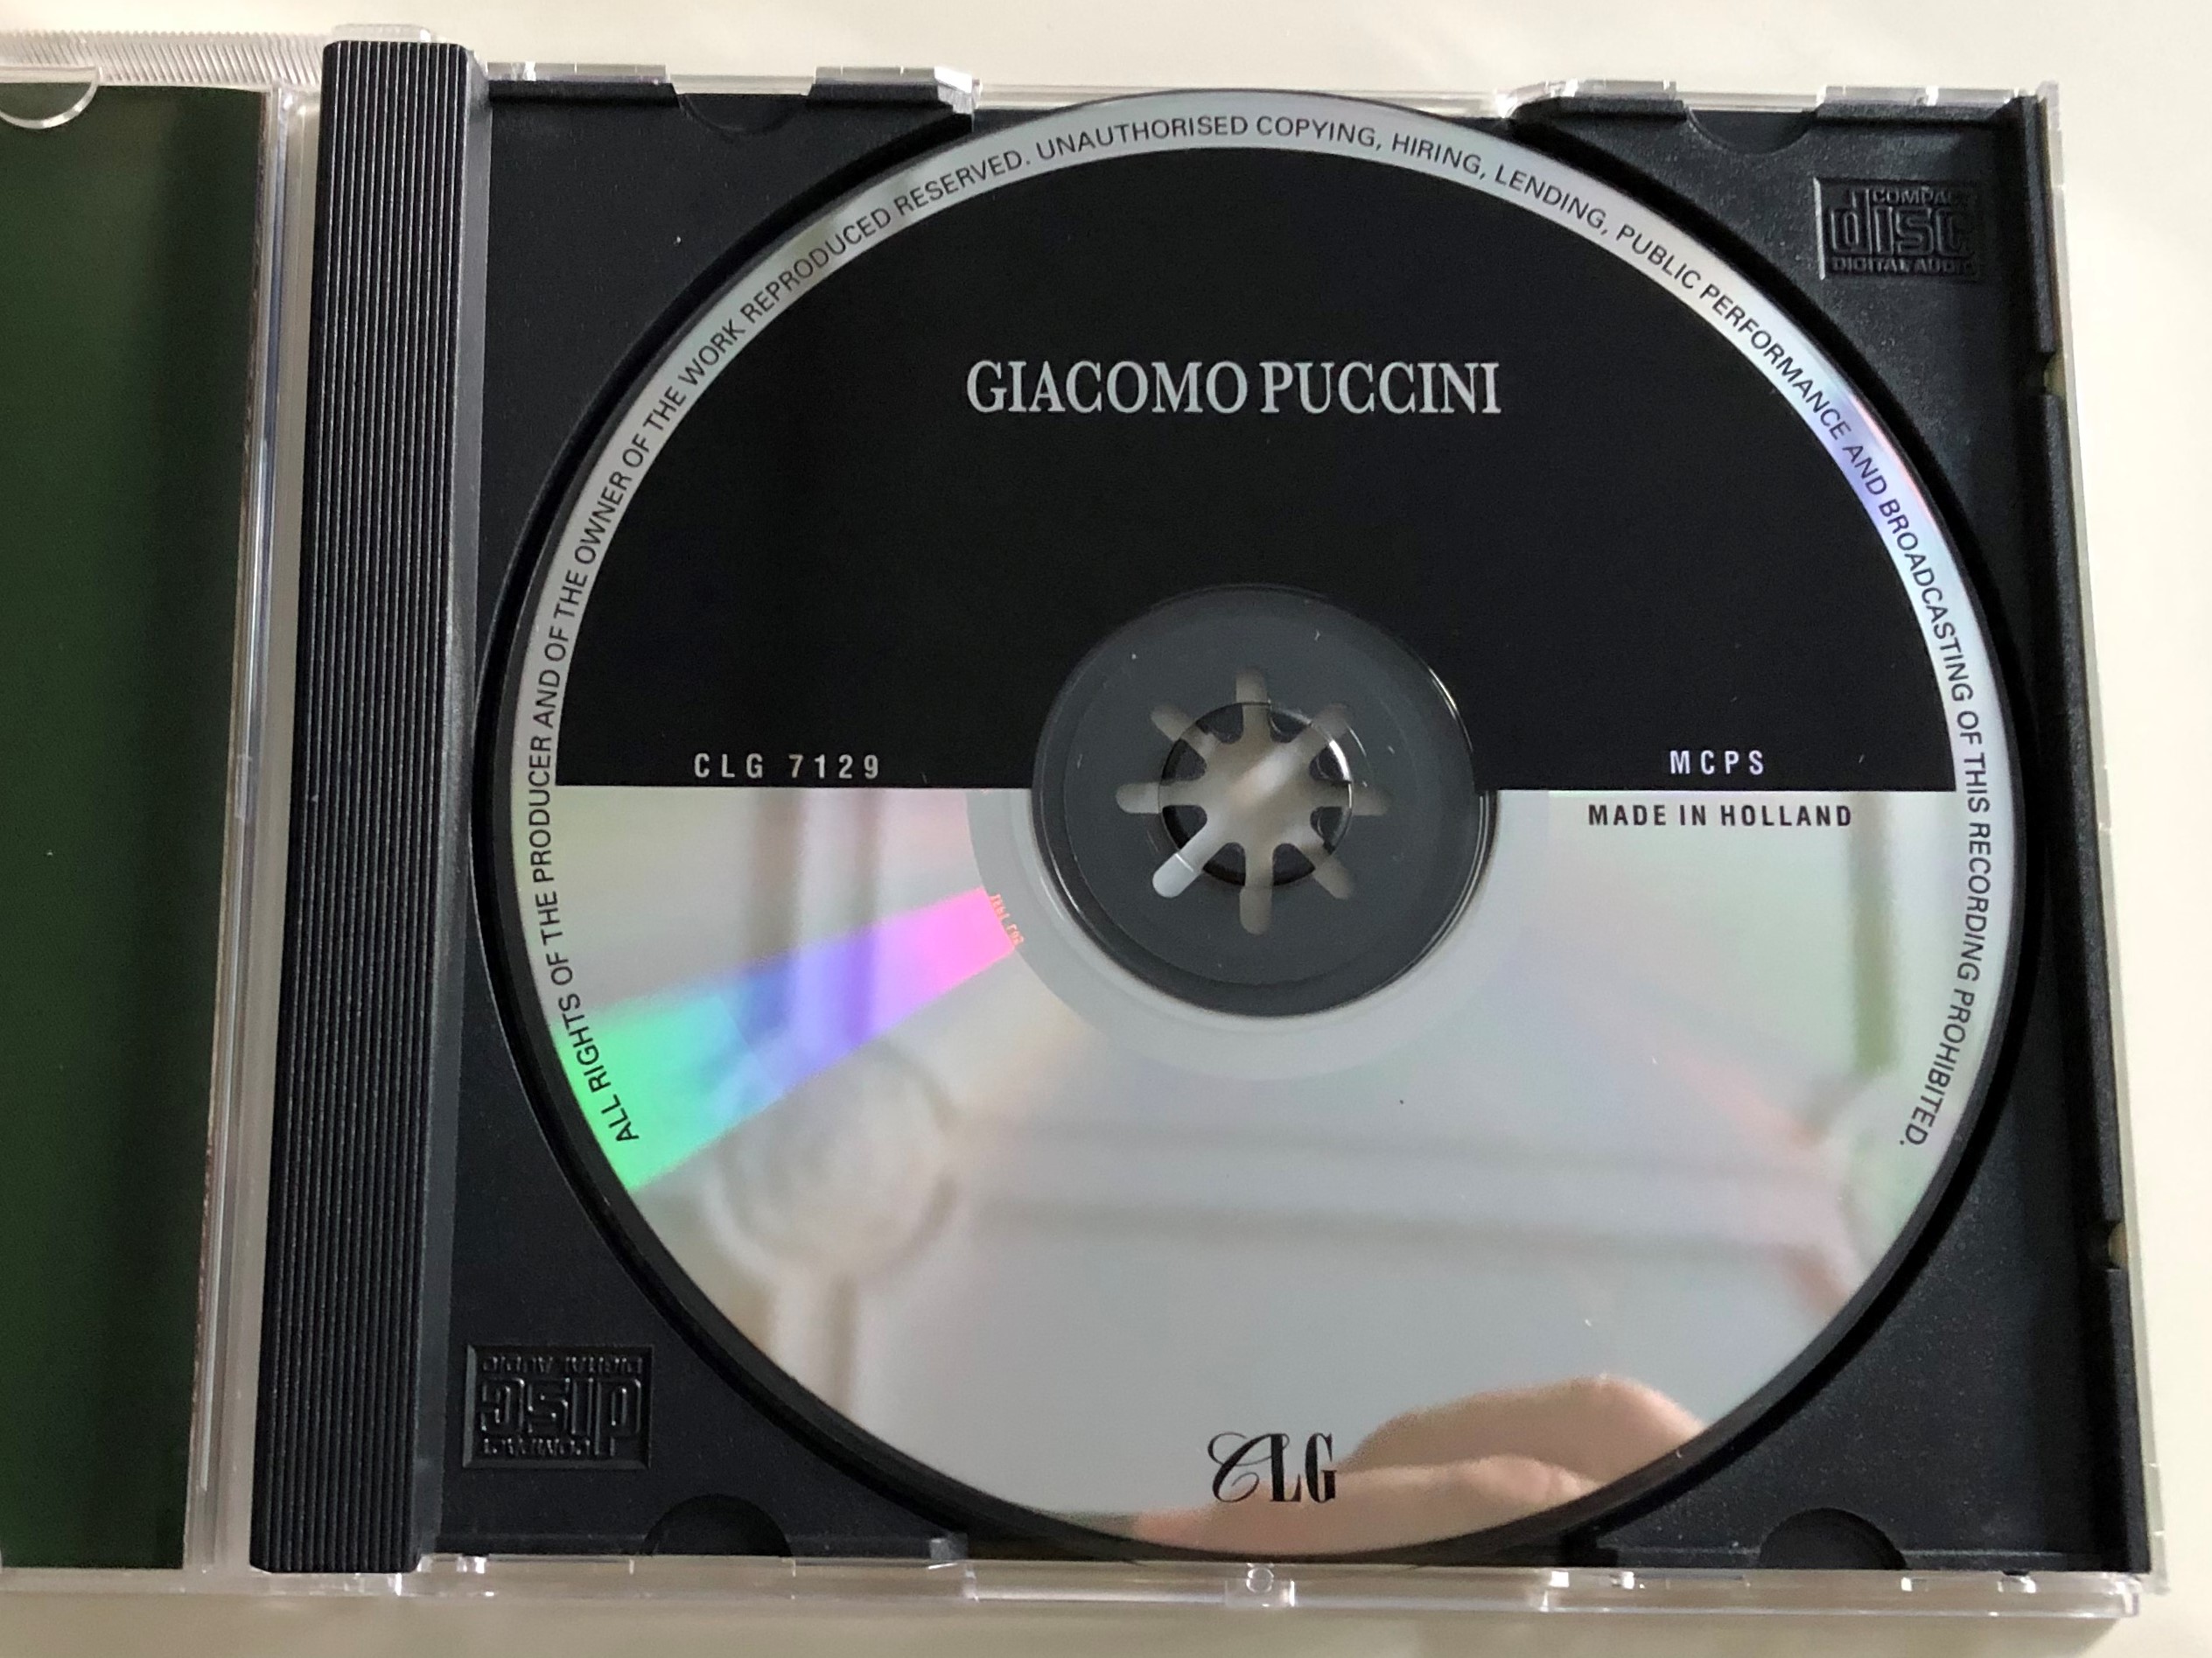 Giacomo Puccini - Highlights from Madama Butterfly / Classical Gallery /  Audio CD 1995 / CLG 7129 - bibleinmylanguage